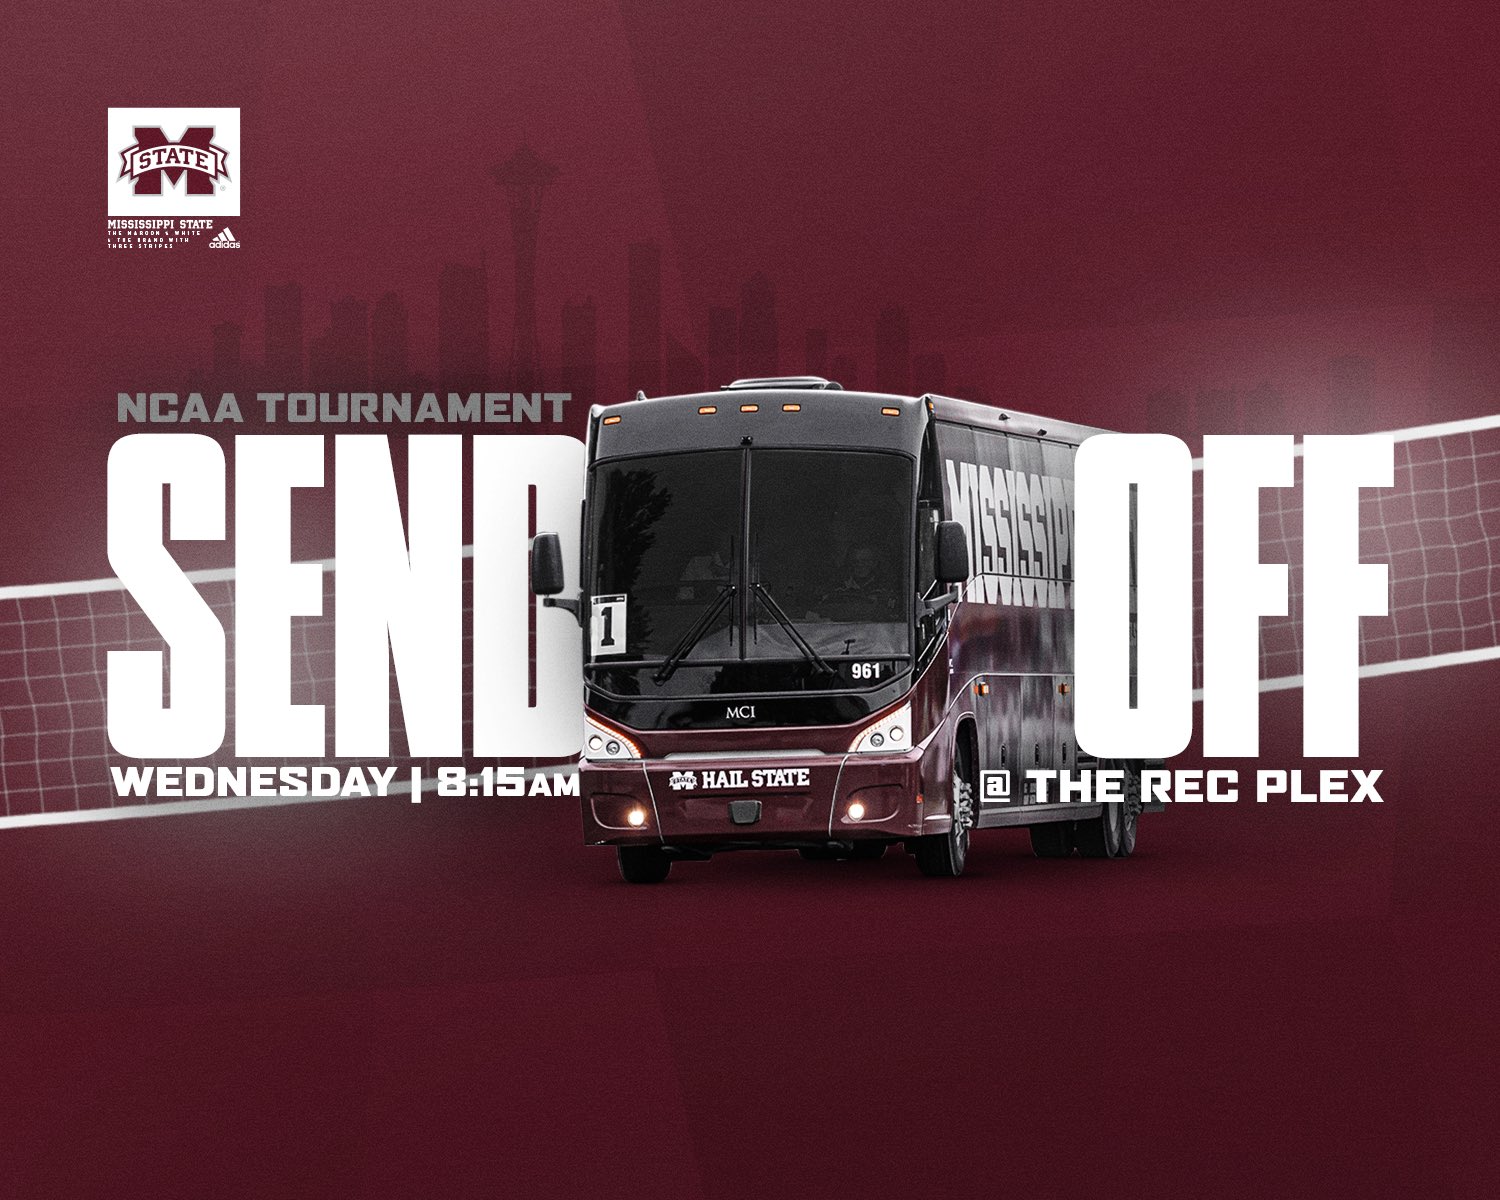 Maroon and white MSU Volleyball NCAA Tournament Send-Off graphic with image of a Hail State bus